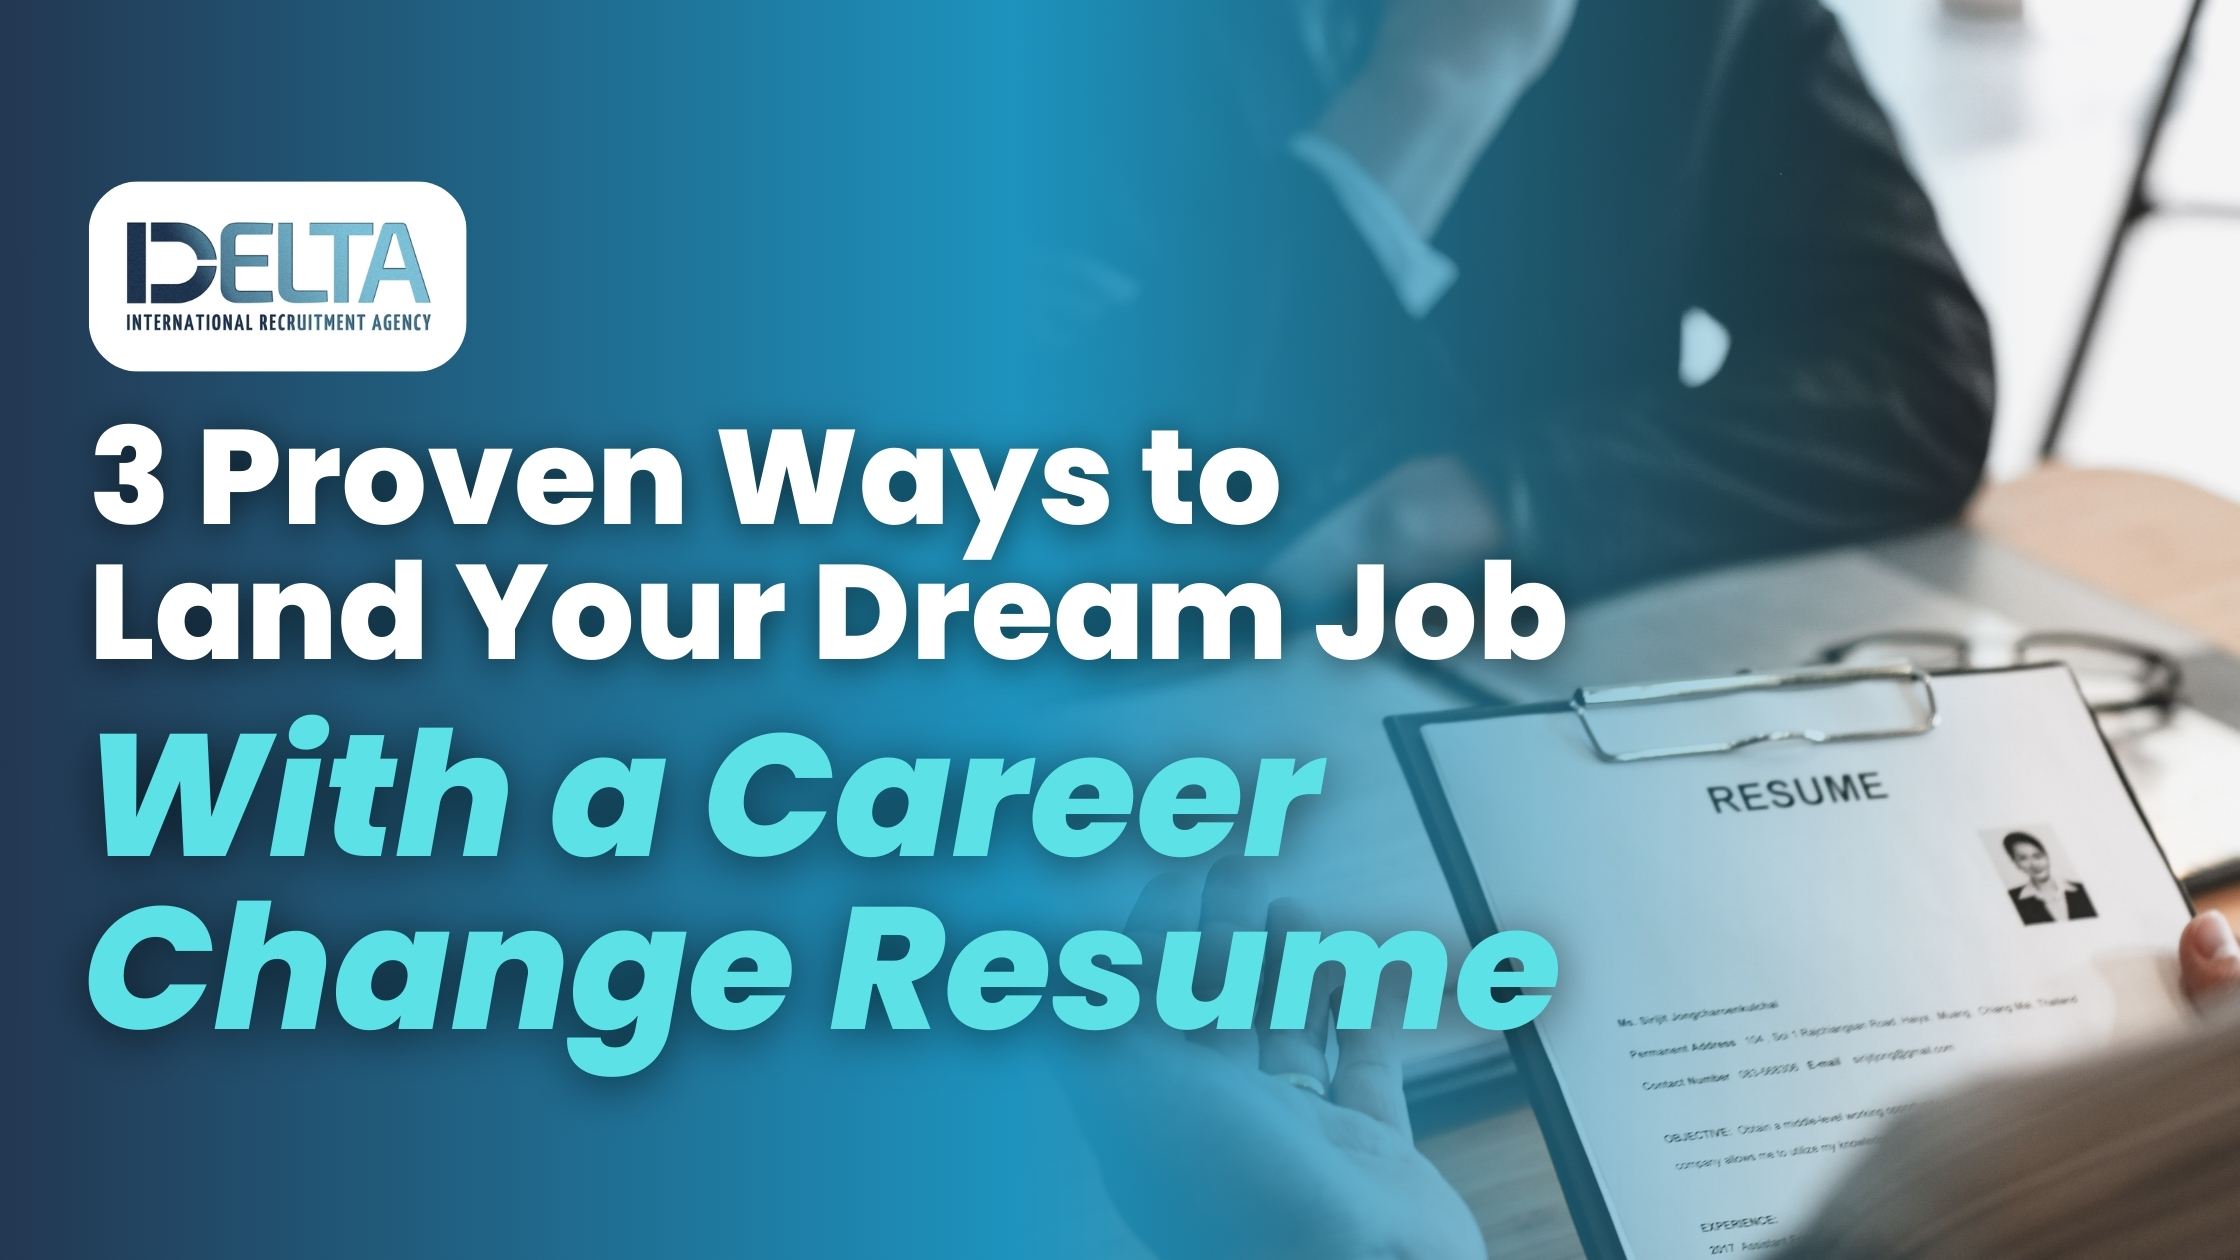 3 Proven Ways to Land Your Dream Job With a Career Change Resume